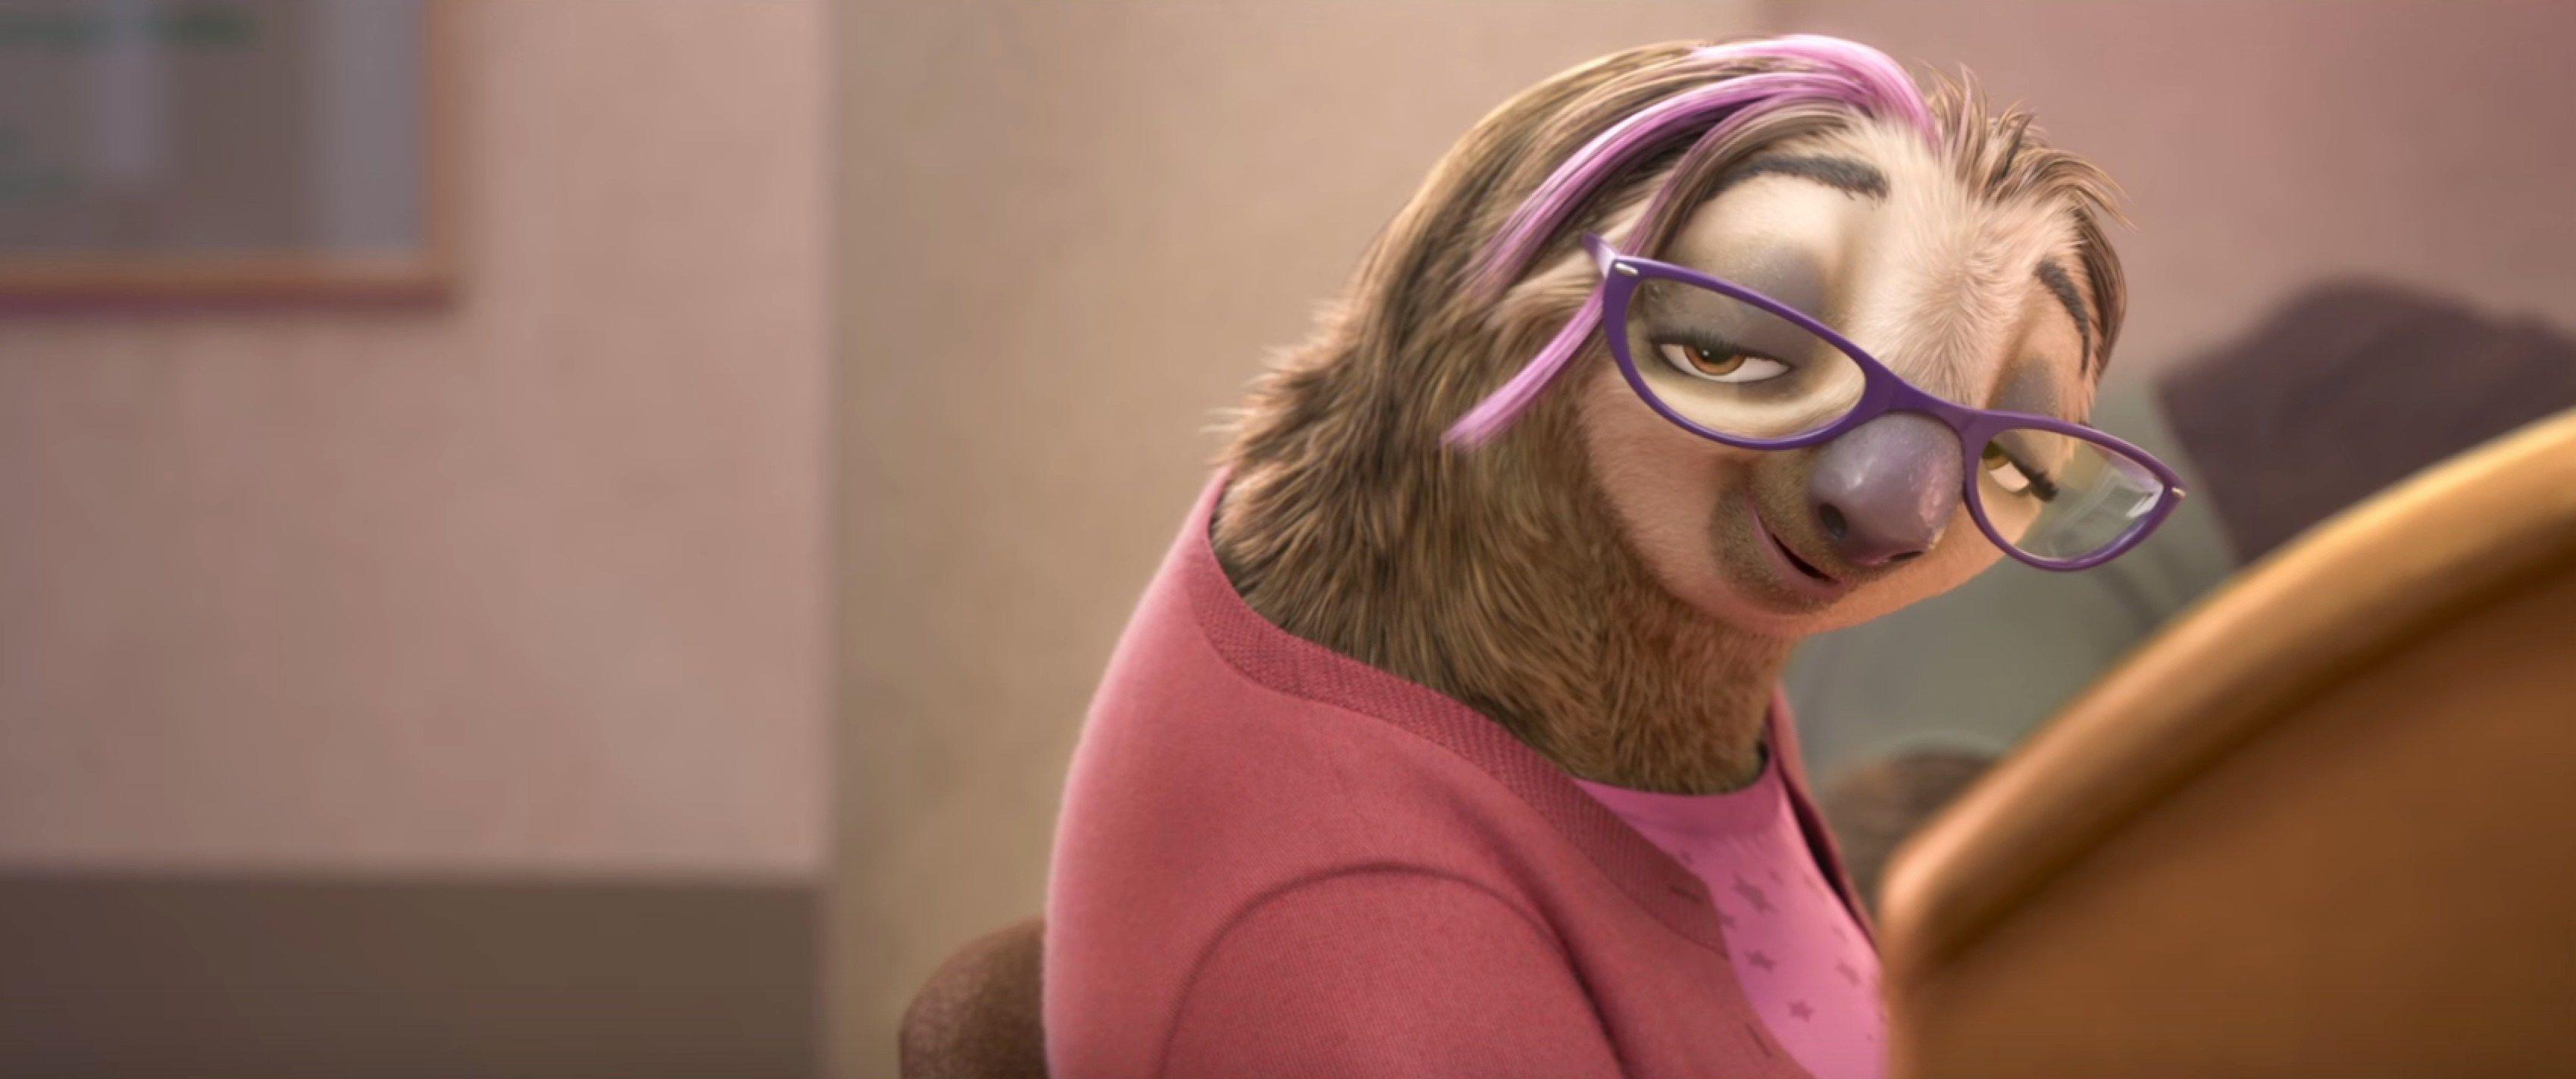 Kristen Bell has a two word role in Disney's Zootopia. How did